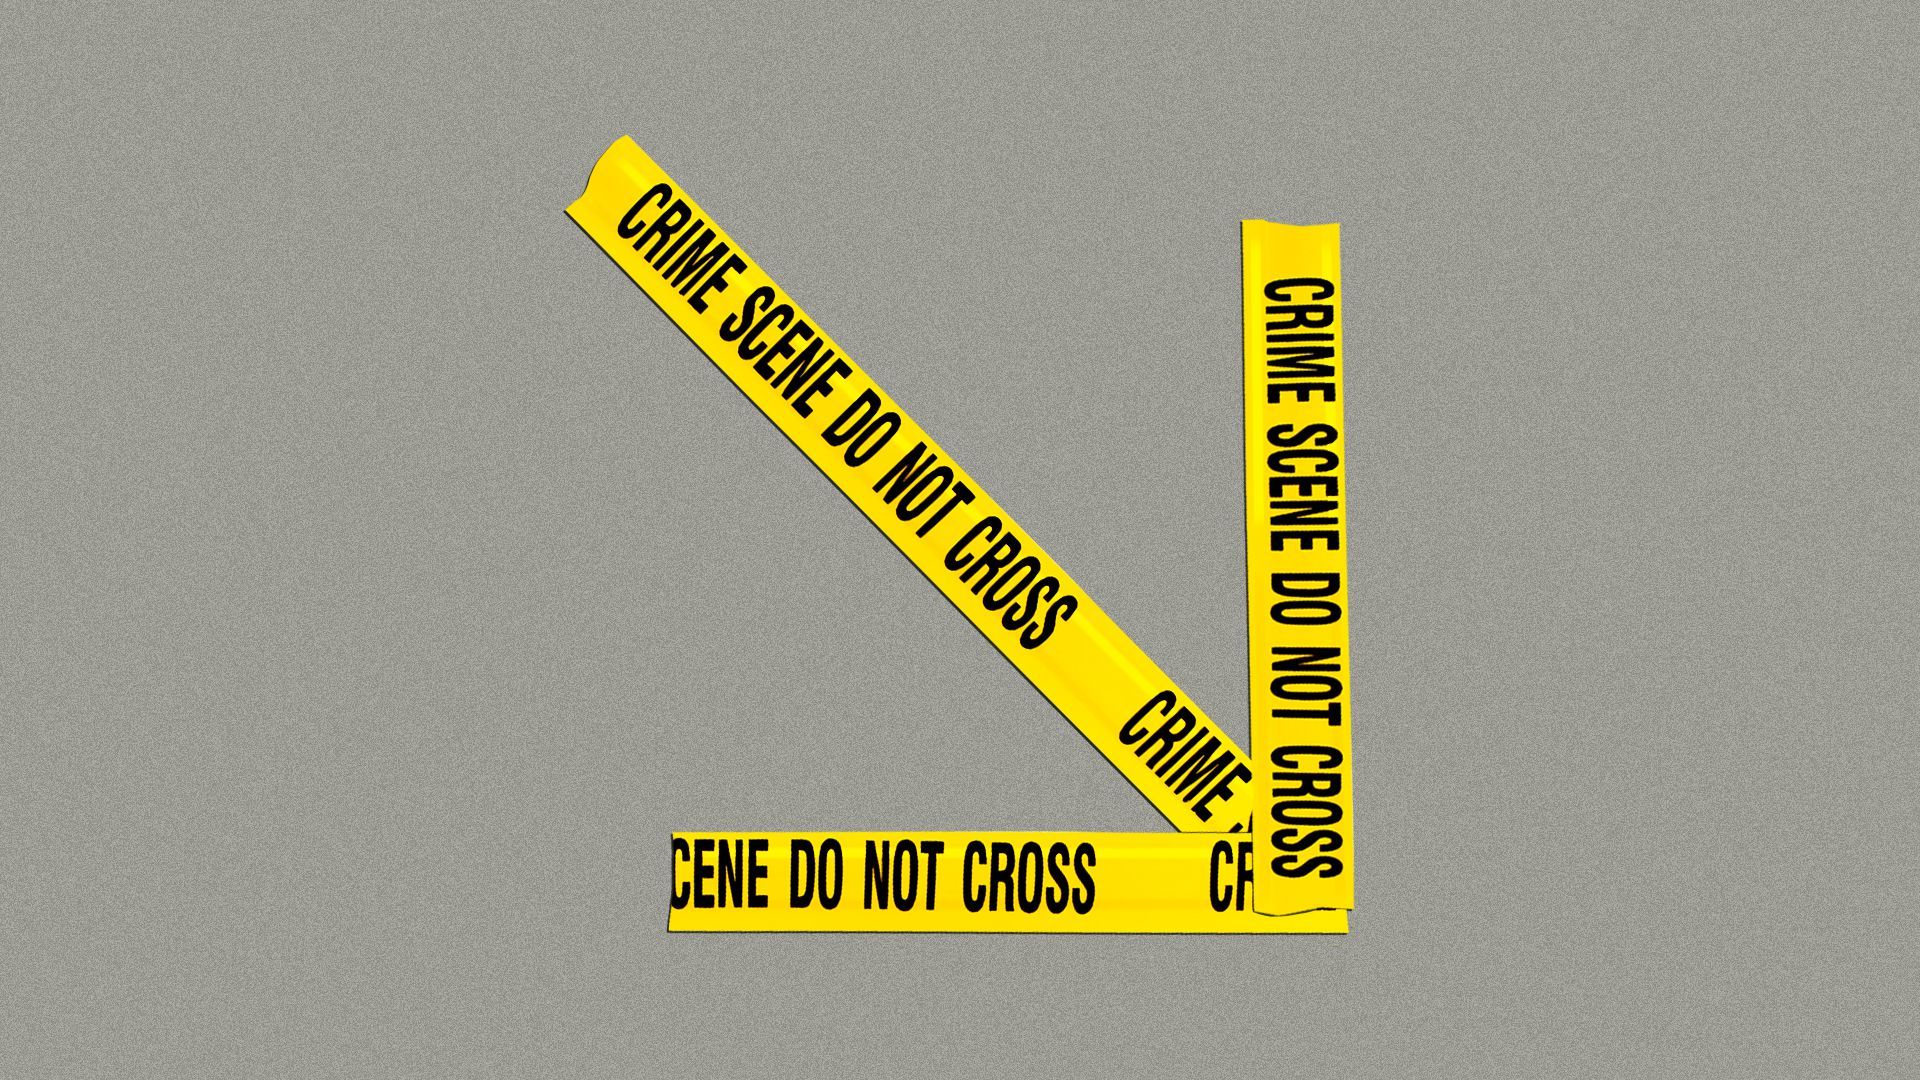 Illustration of a downward arrow made out of crime-scene tape.